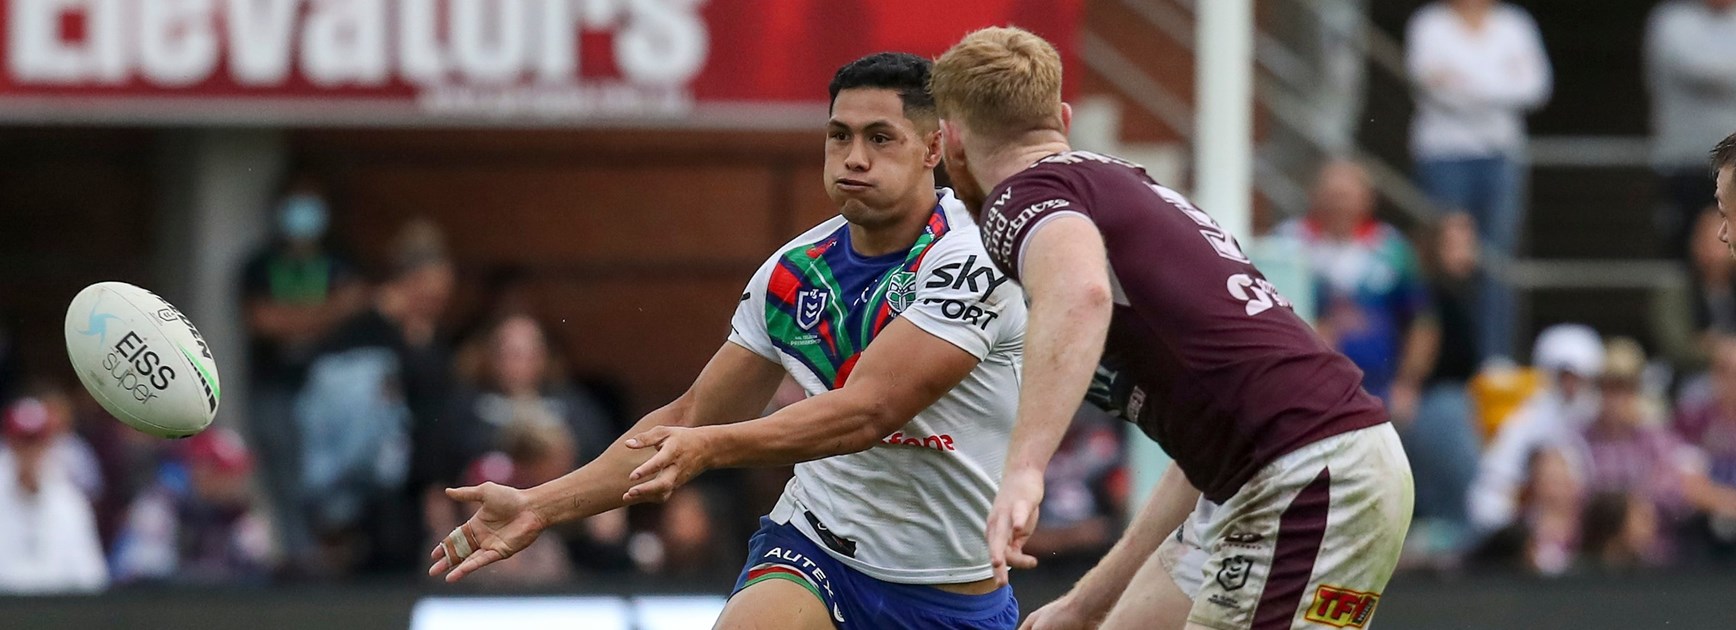 Round 9 snapshot: Cleary edges ahead of RTS in Dally M race